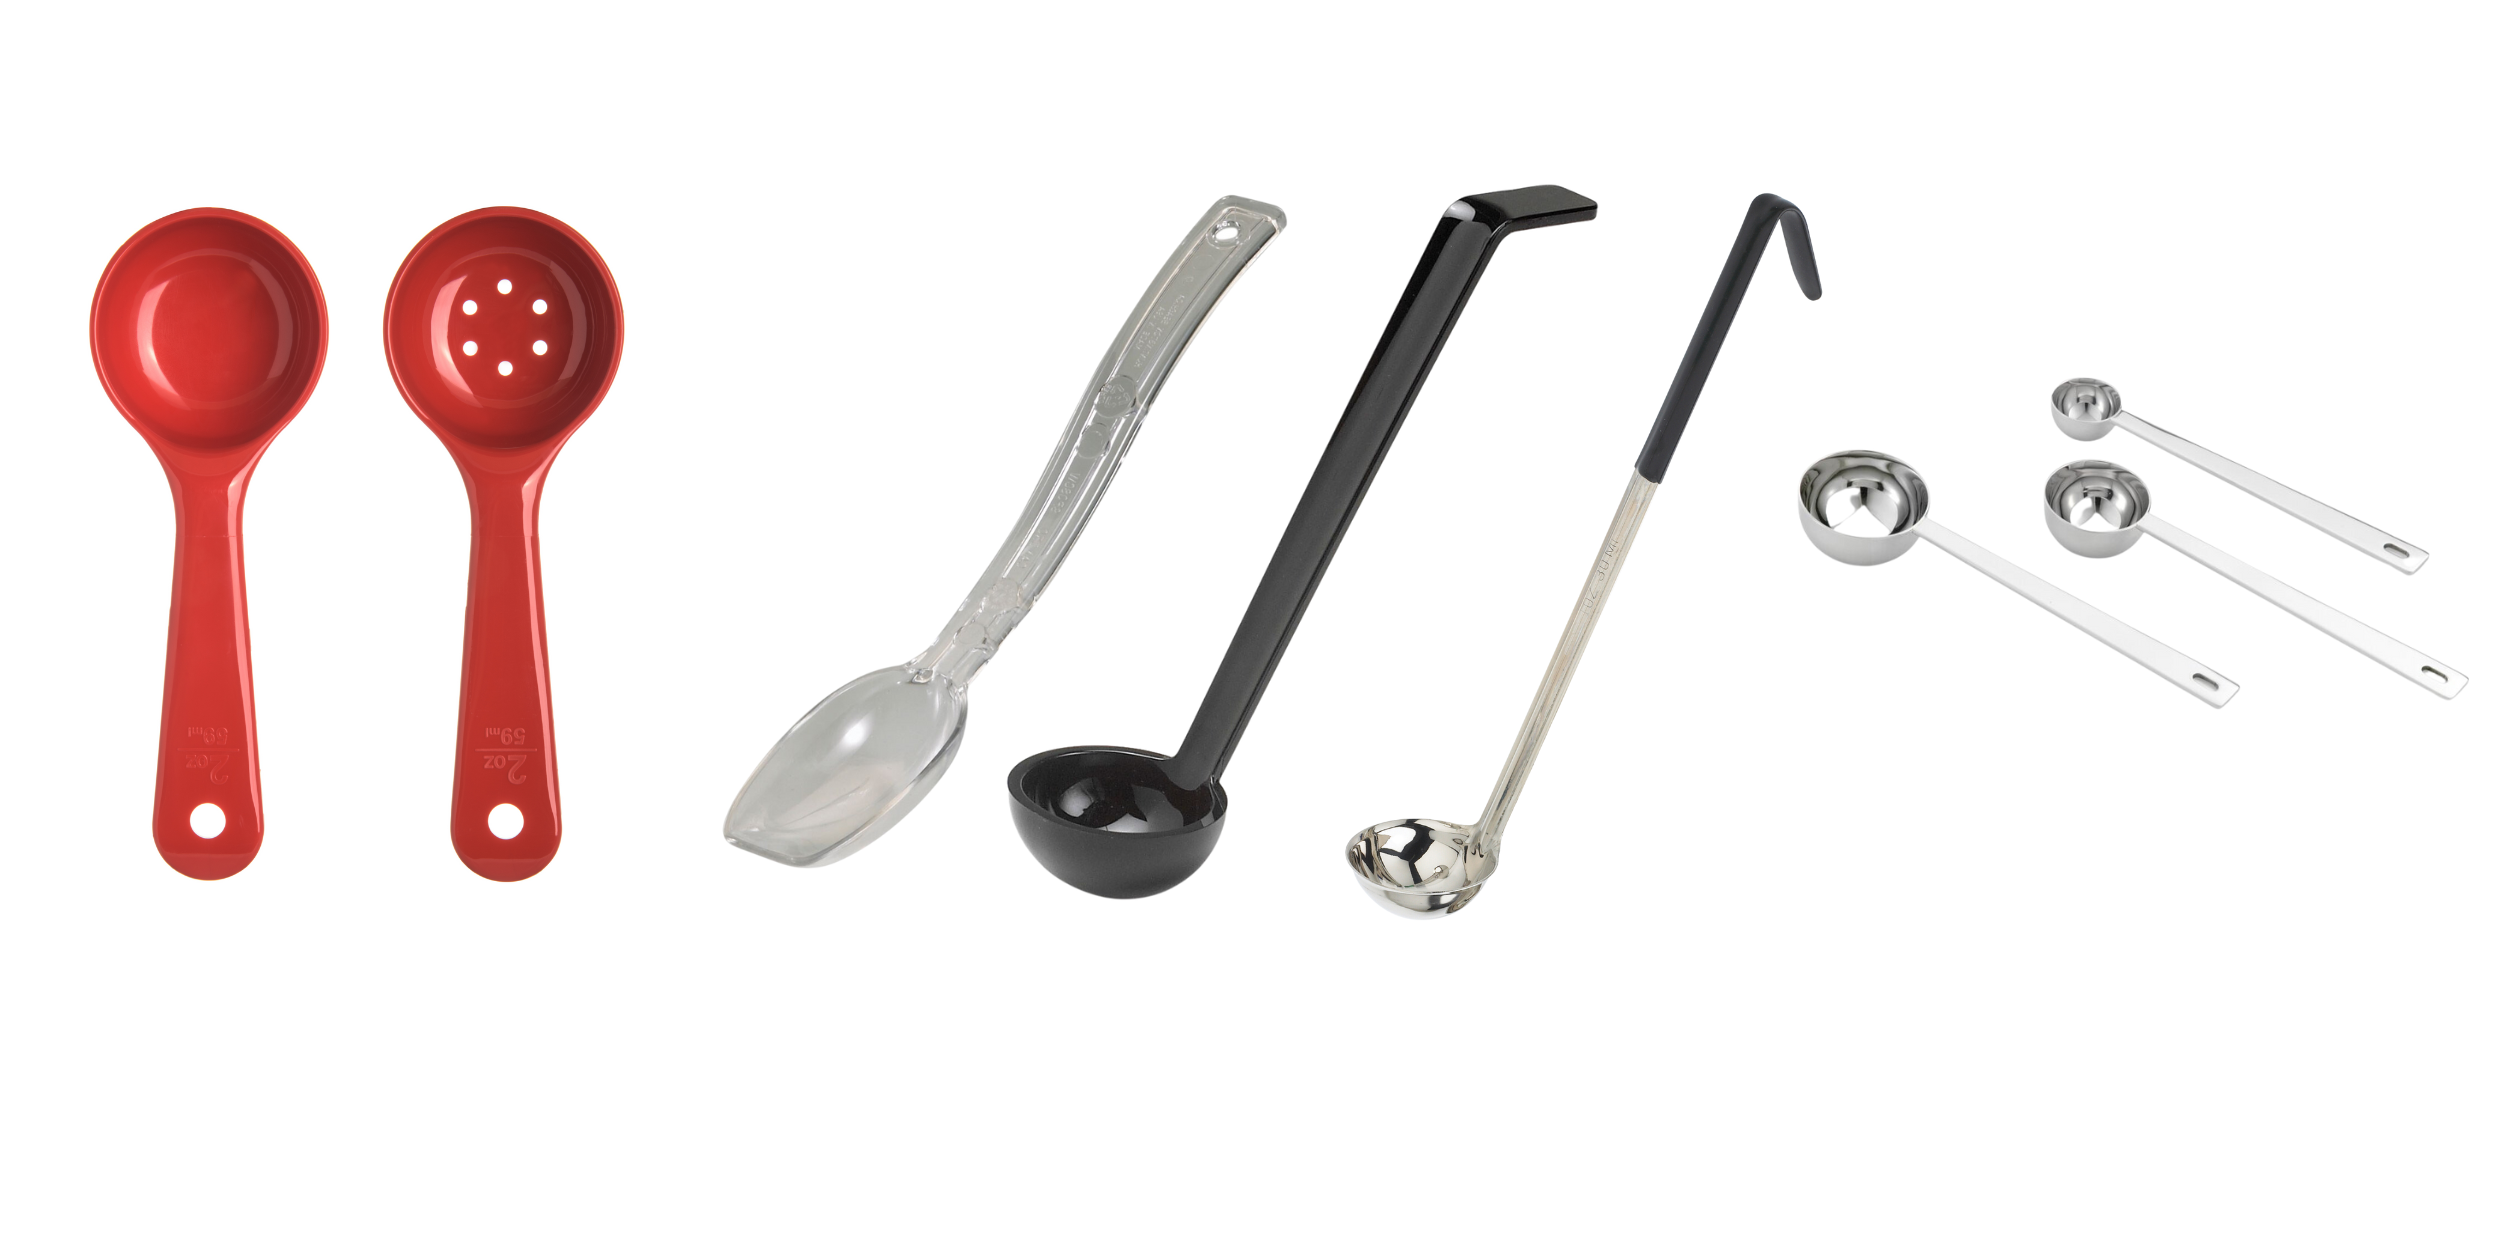 Portion control spoons, scoops and ladles